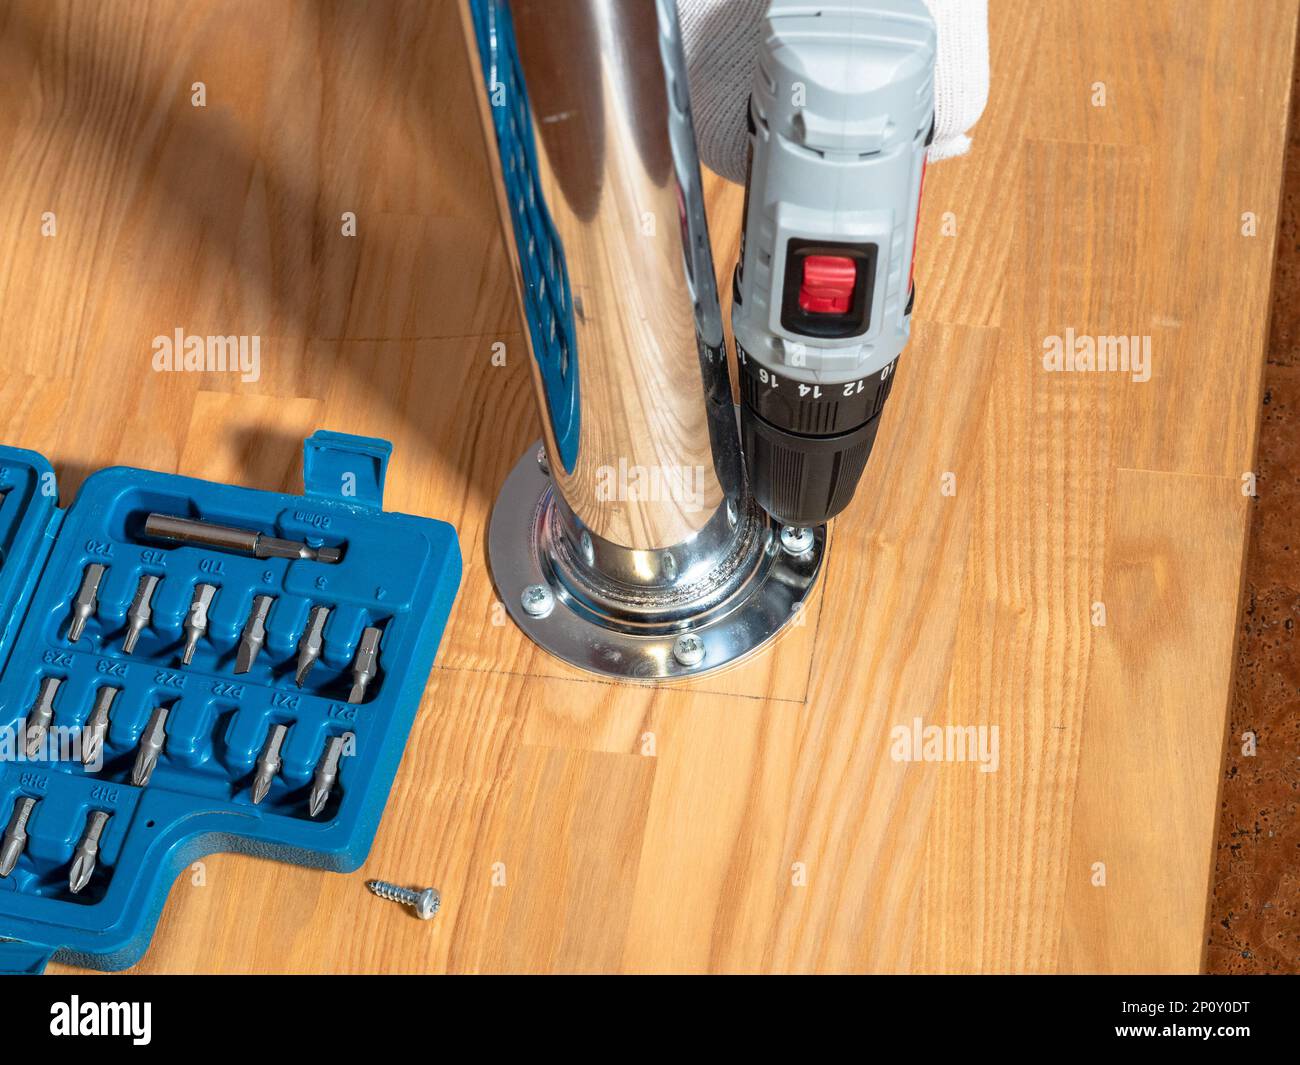 attaching table leg to wooden surface with screws and electric screwdriver Stock Photo